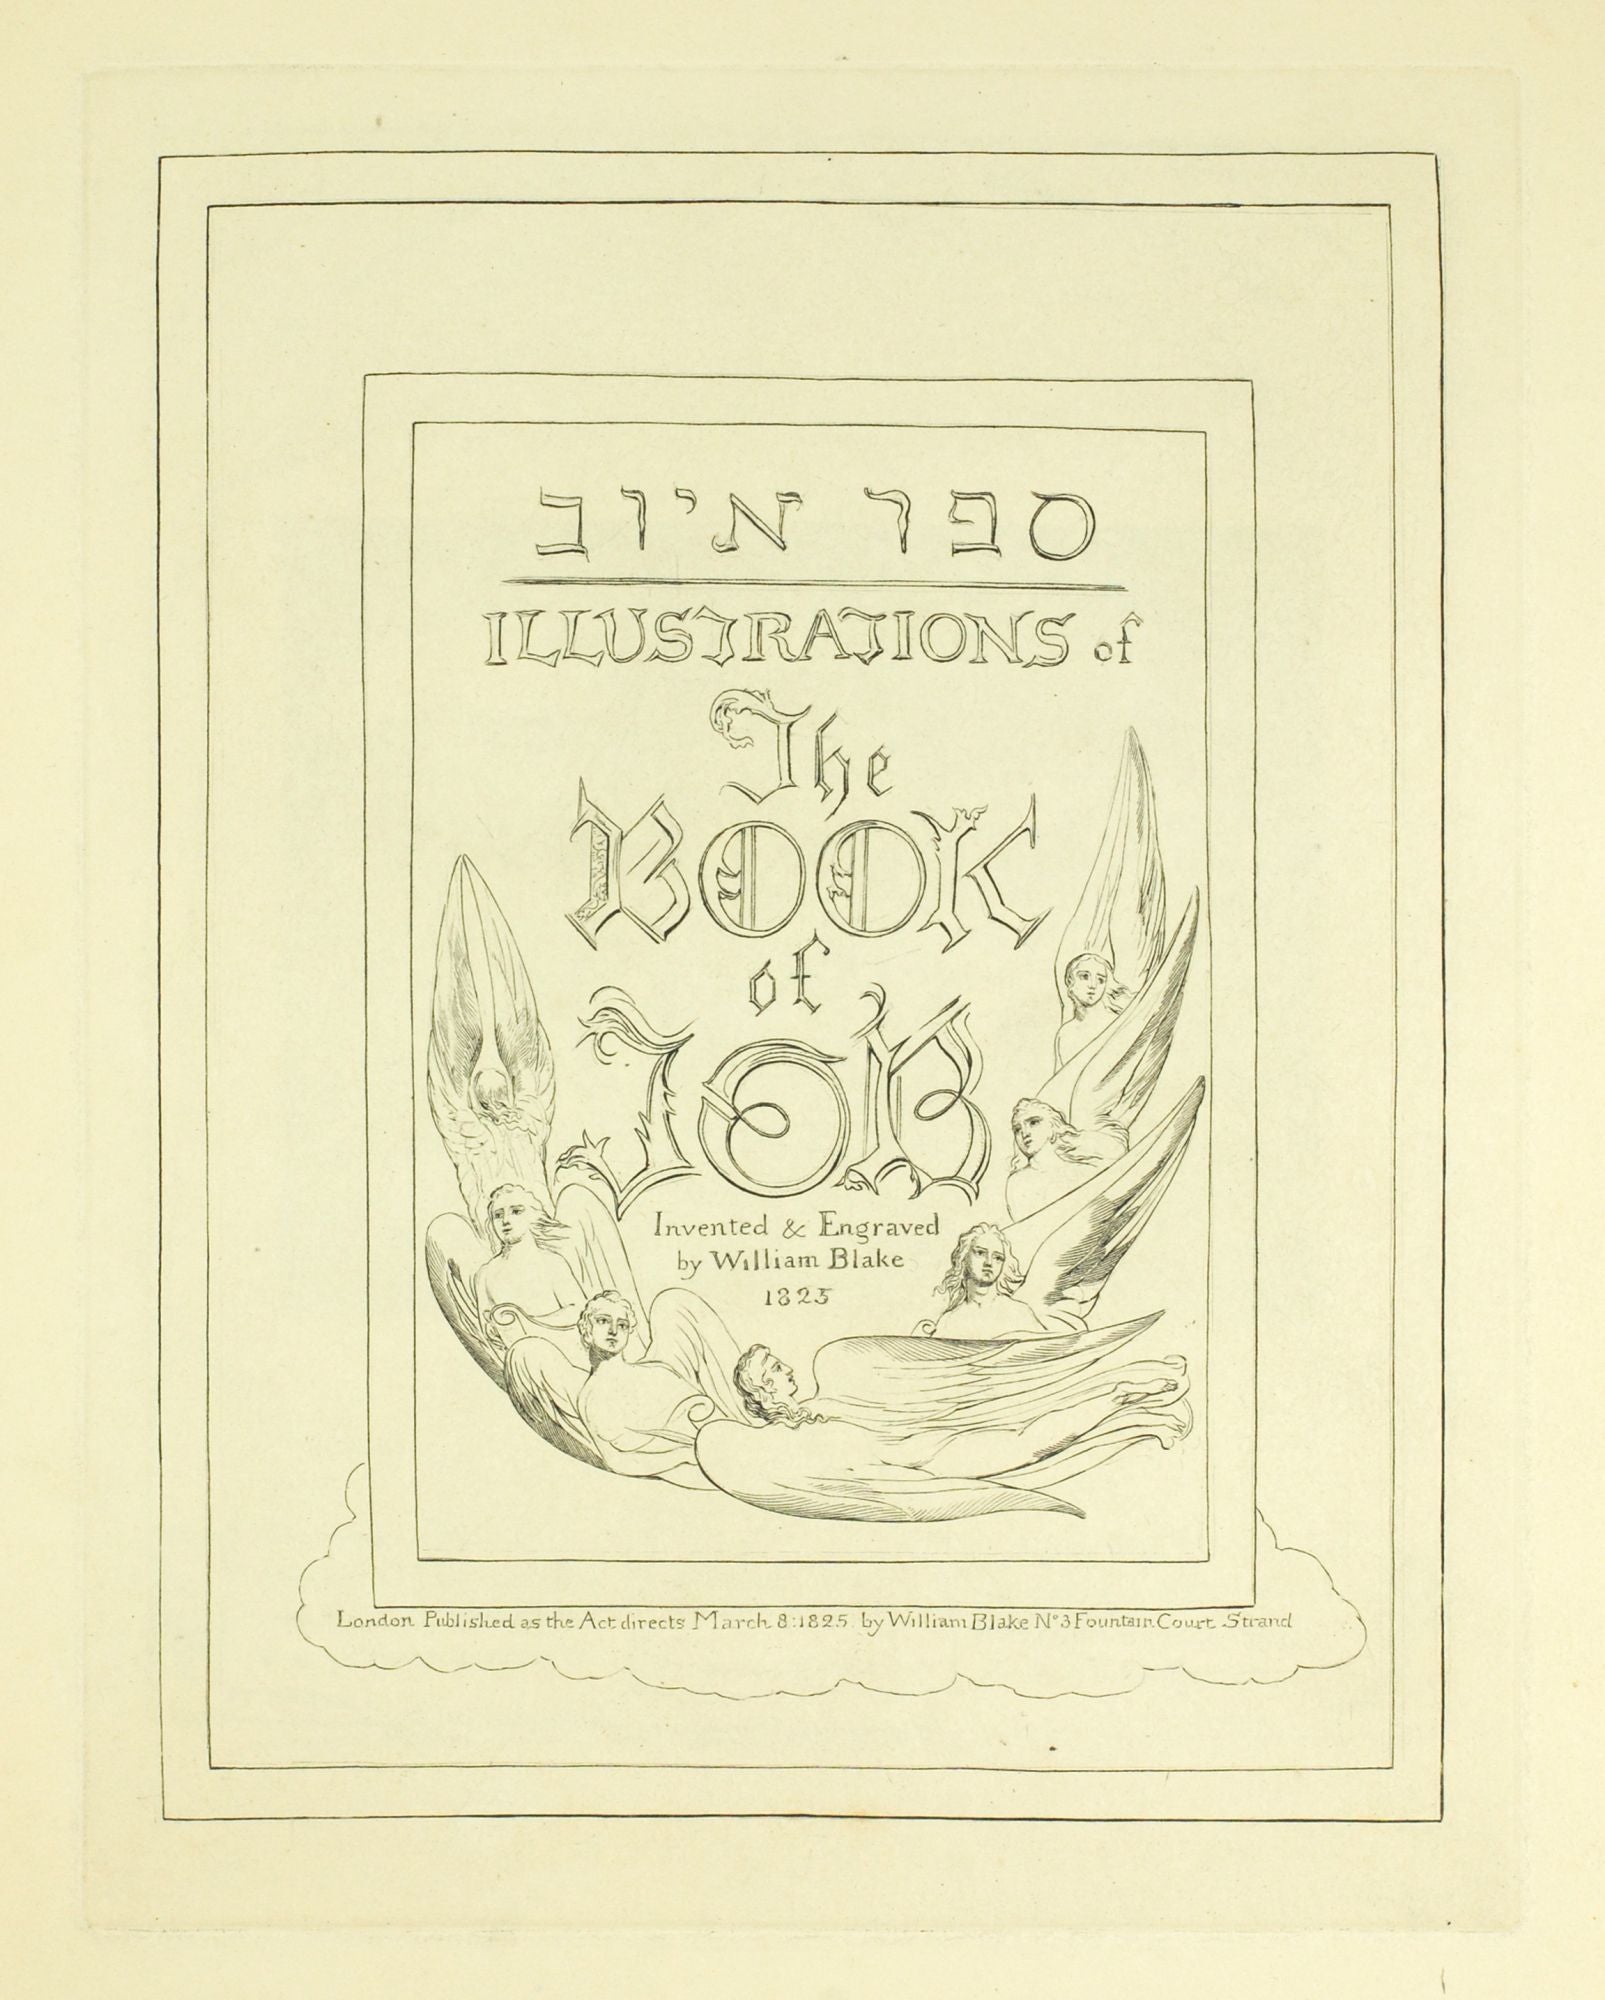 Illustrations of the Book of Job by William Blake on John Windle  Antiquarian Bookseller